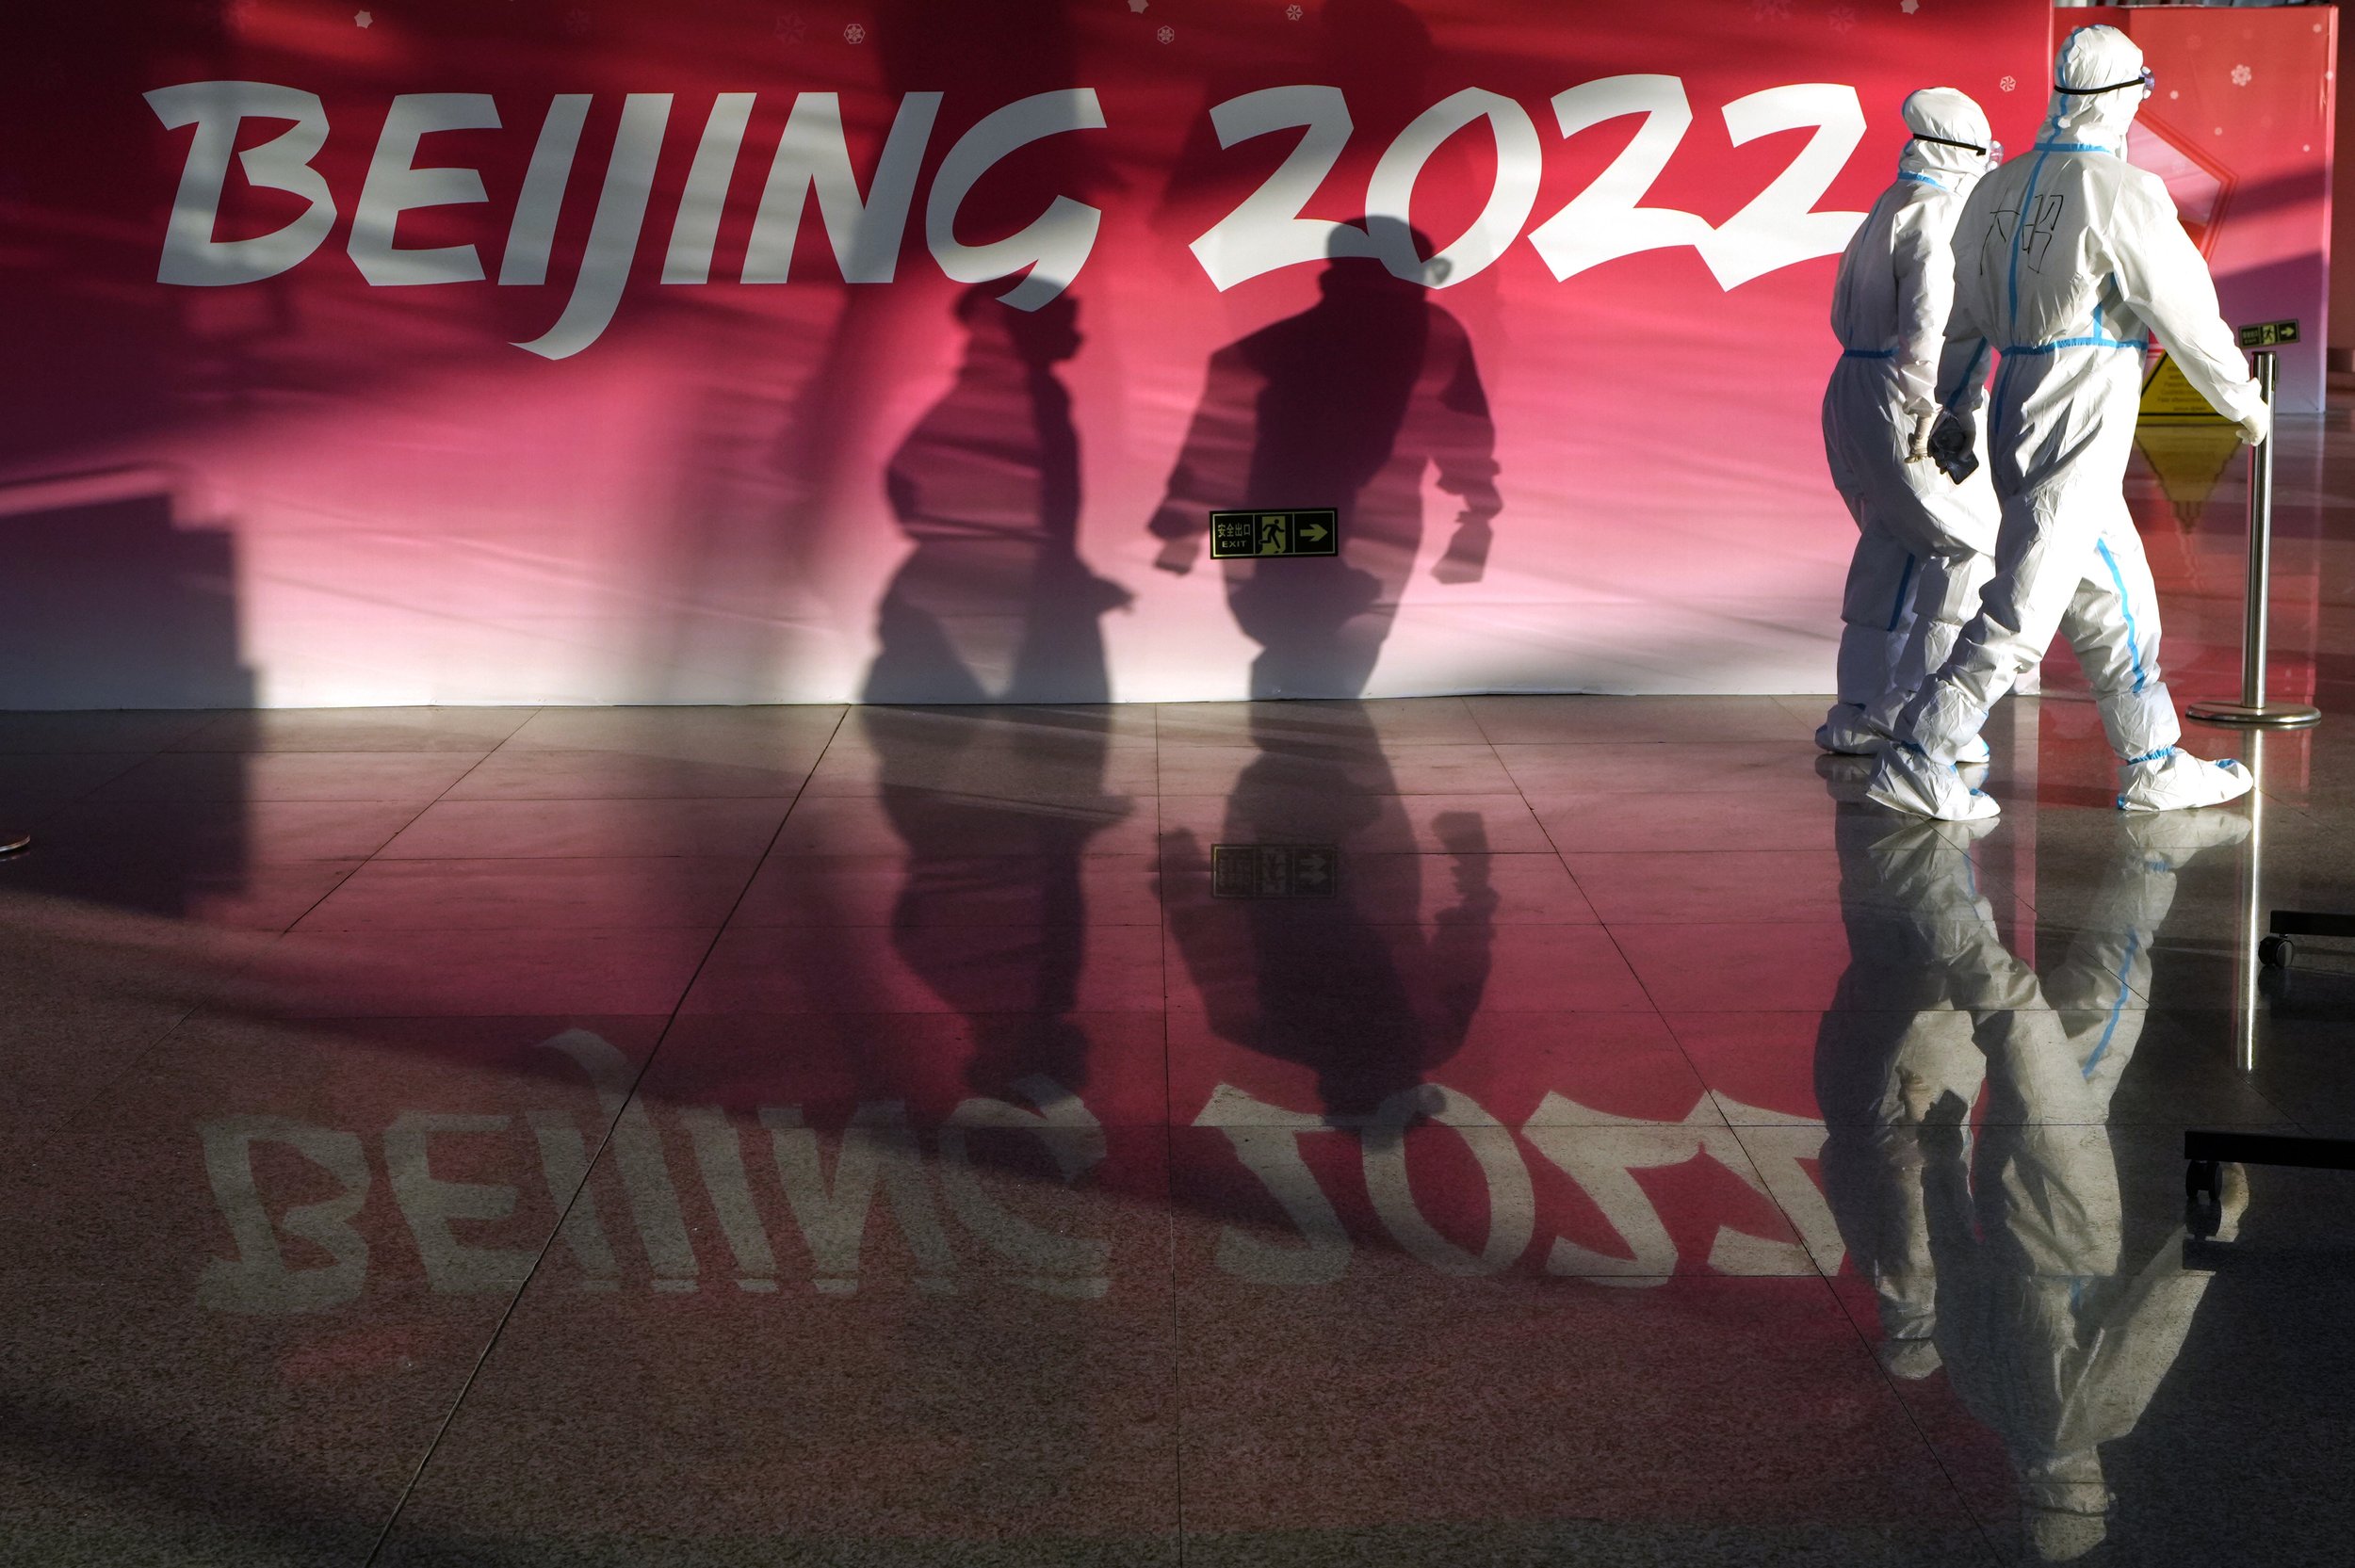  Olympic workers in protective gear walk through the Beijing Capital International Airport as they work to assist passengers ahead of the 2022 Winter Olympics, in Beijing, on Monday, Jan. 31, 2022. (AP Photo/Kirsty Wigglesworth) 